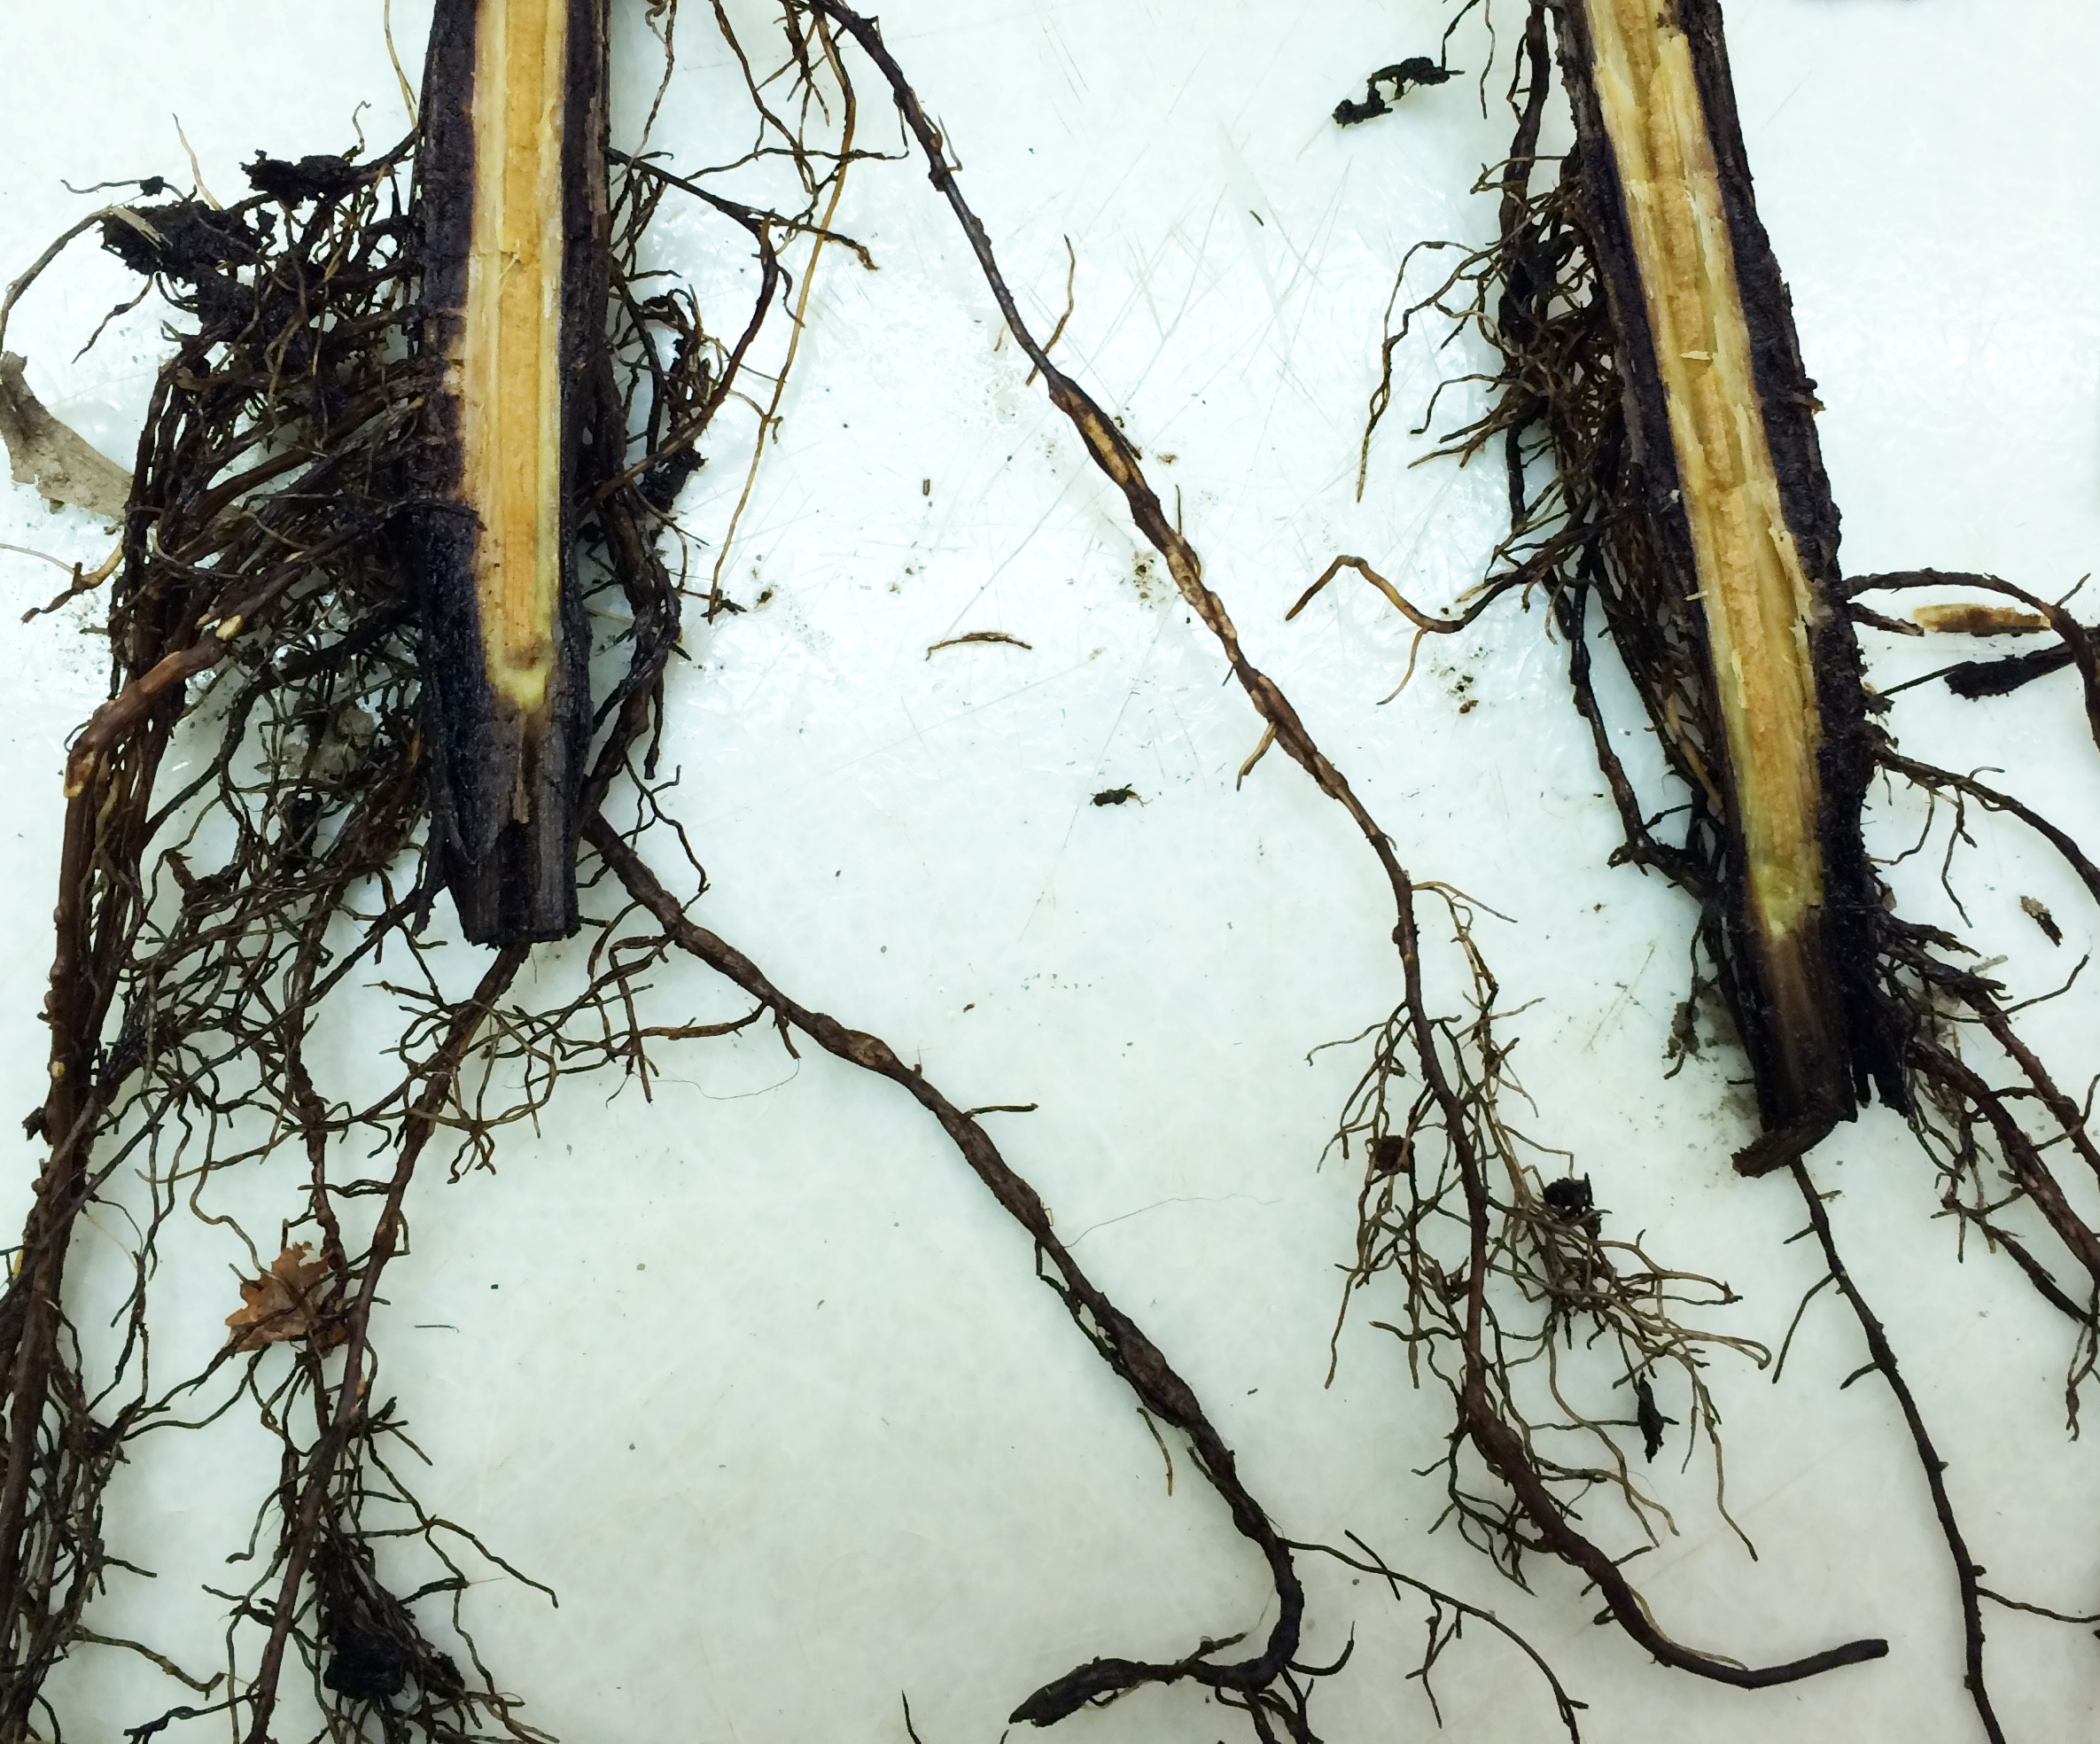 Phytophthora crown and root rot symptoms. 